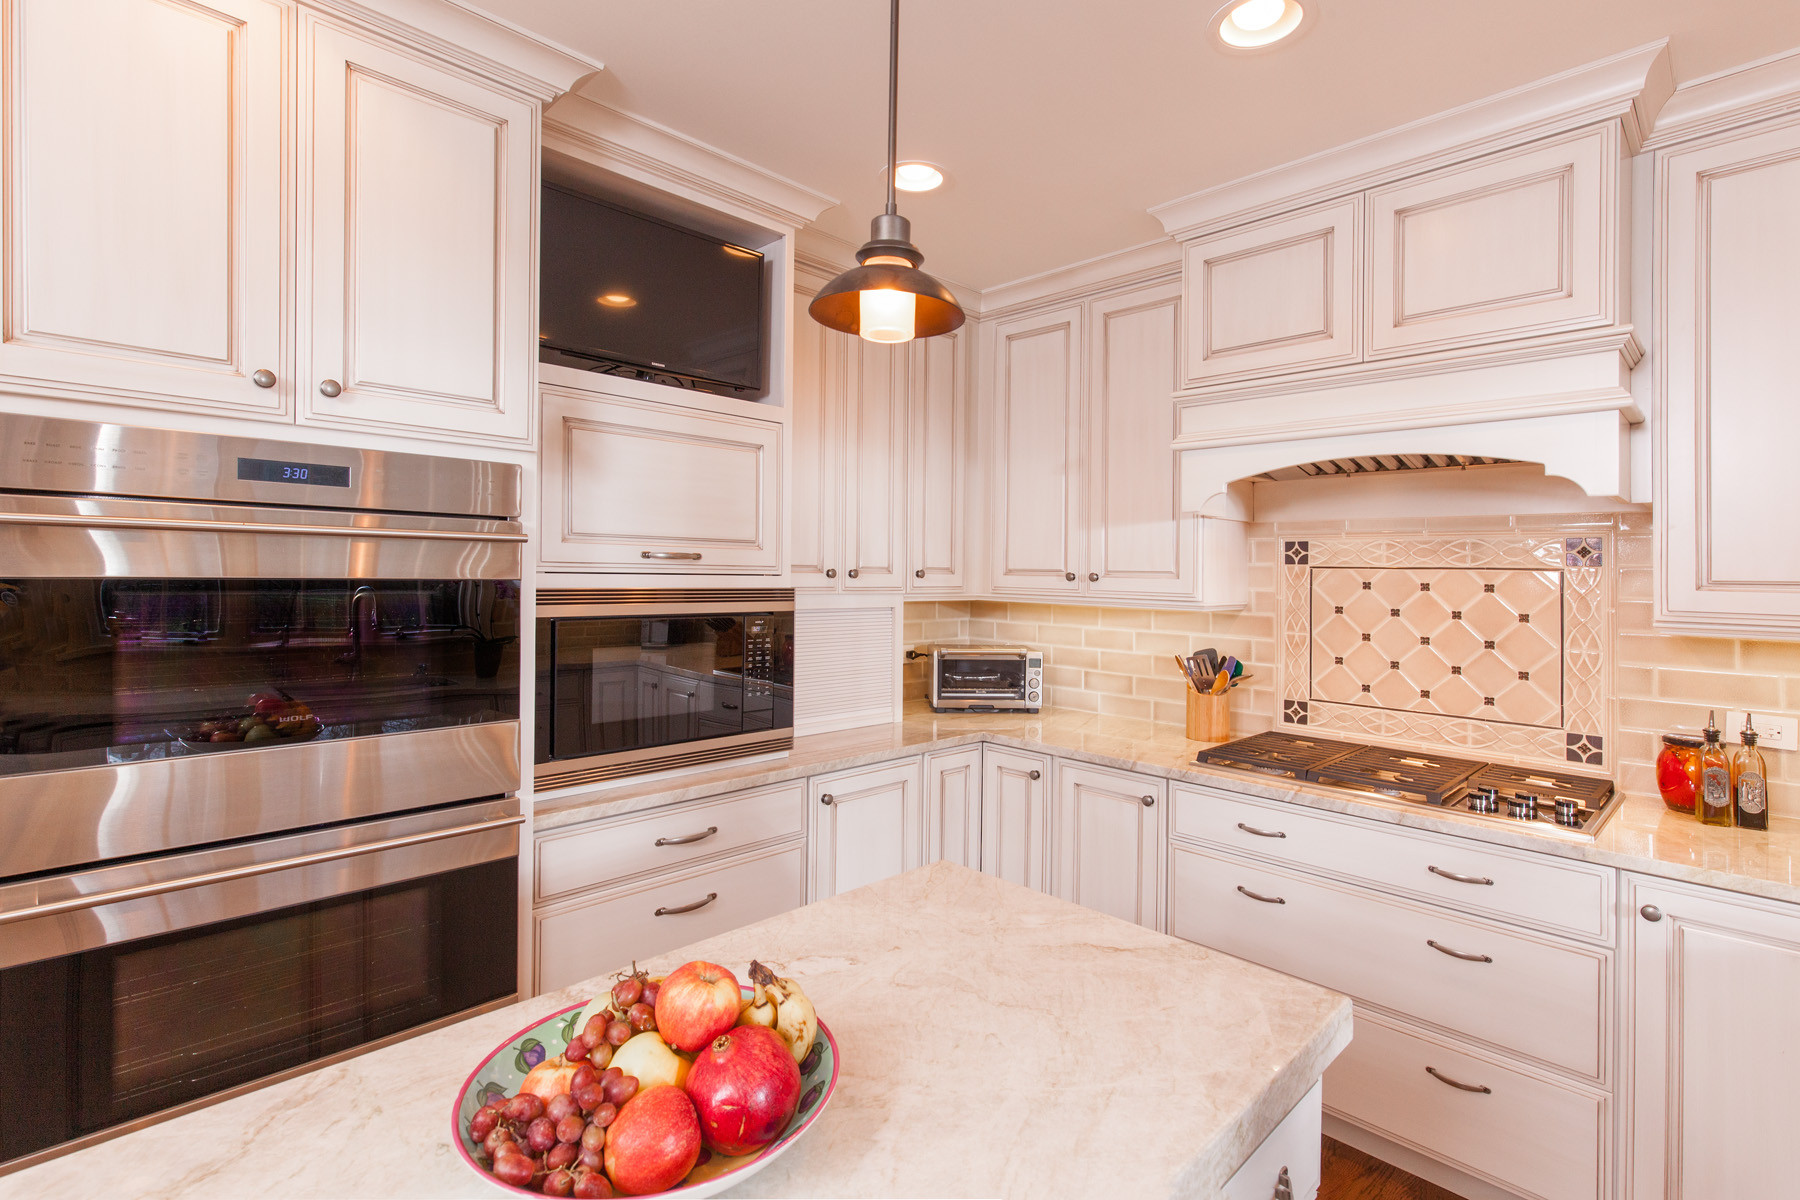 Kitchen Remodeling Chicago
 Chicago Kitchen Remodeling Contractor Get Your Dream